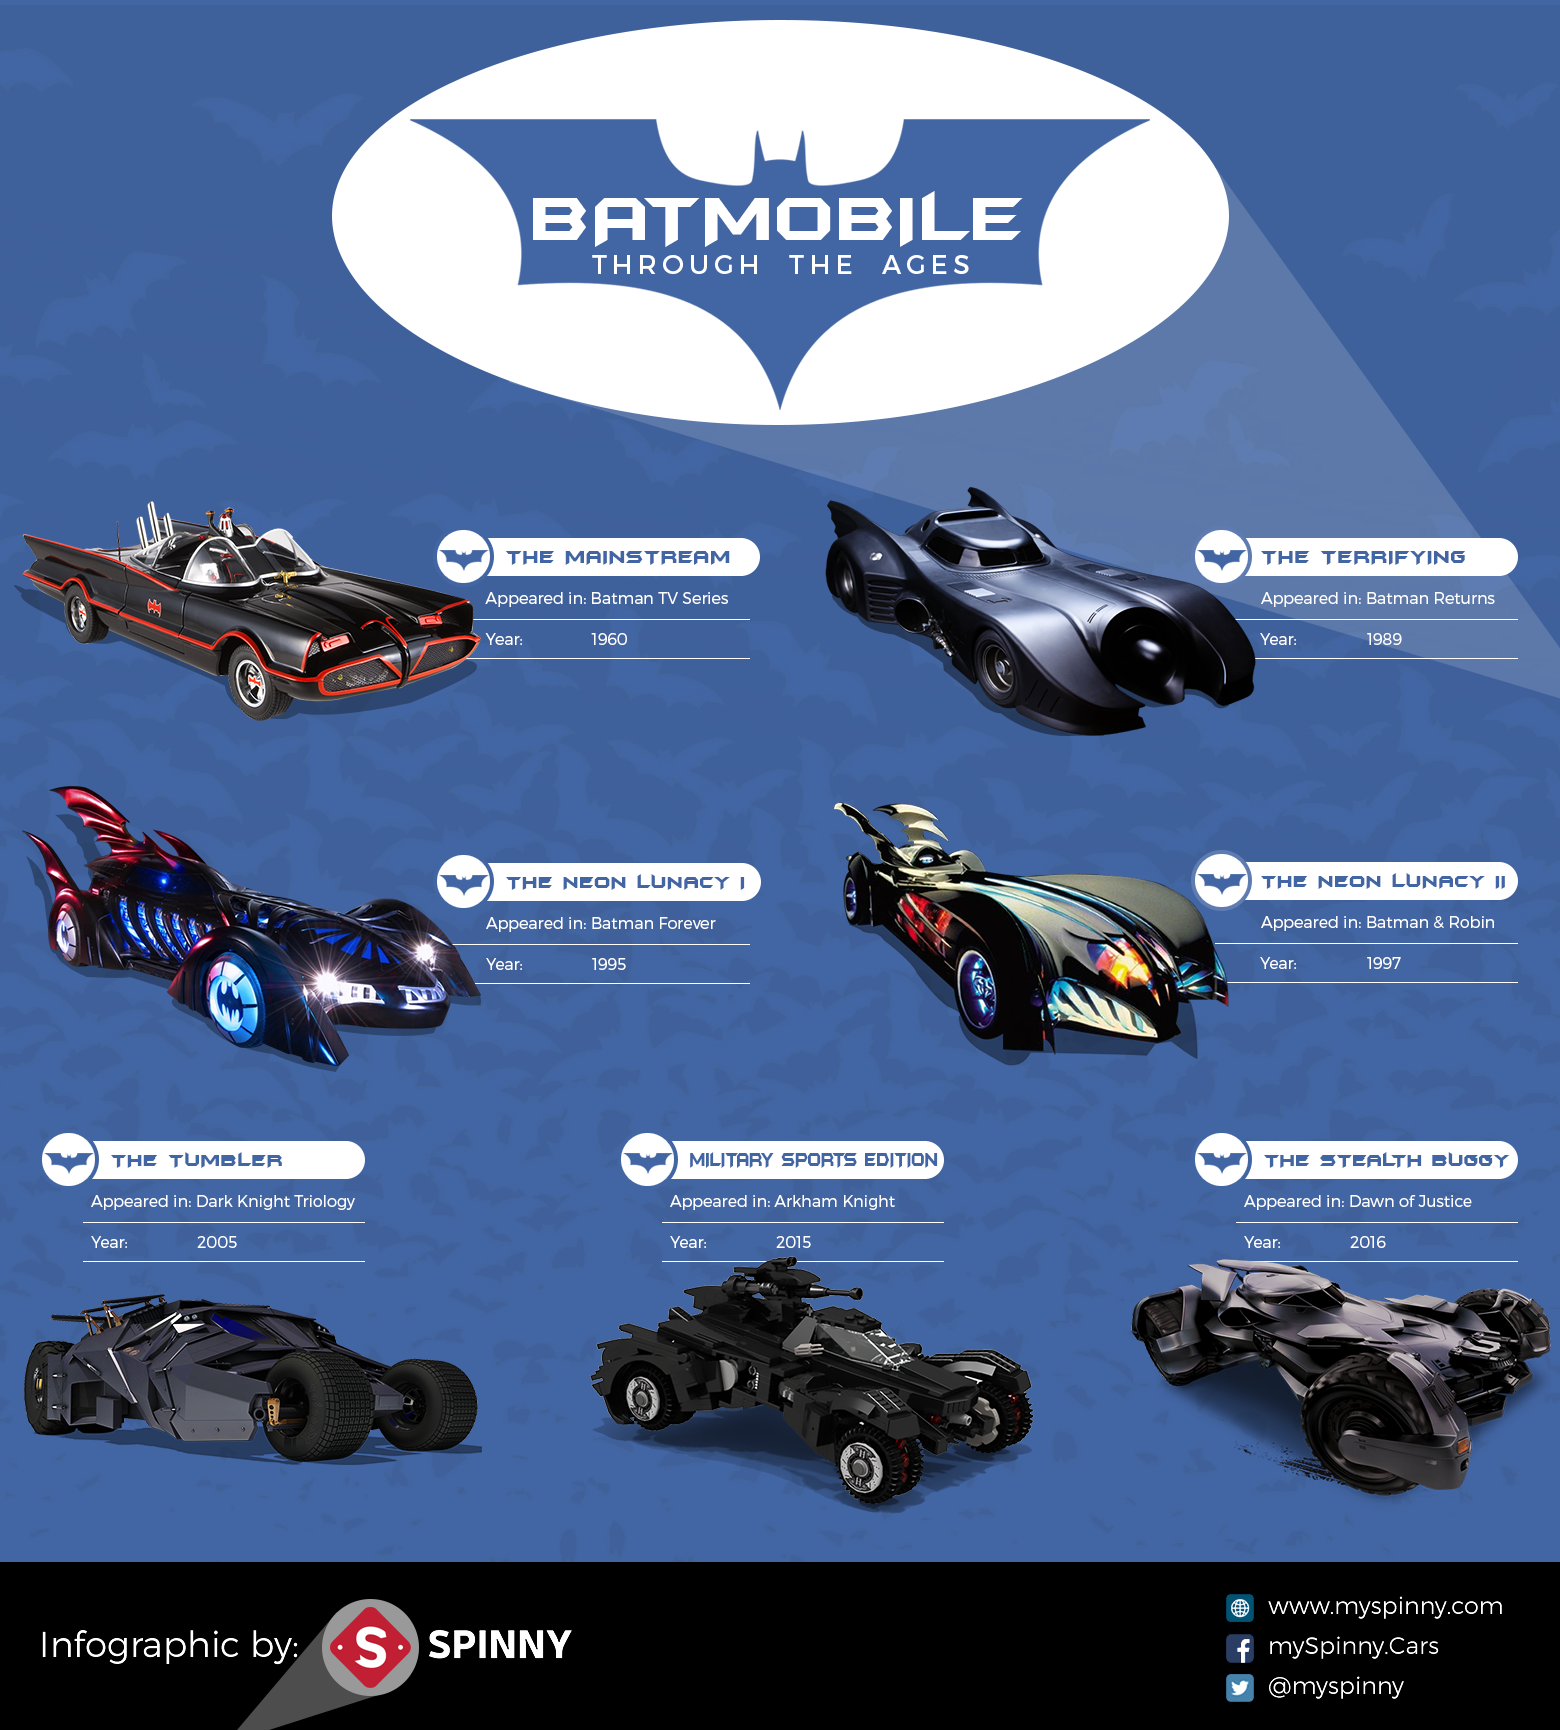 Batmobiles. Automobiles used by batman in various Tv Series, movies & games over the ages. Batman batmobile, Batmobile, Batman car